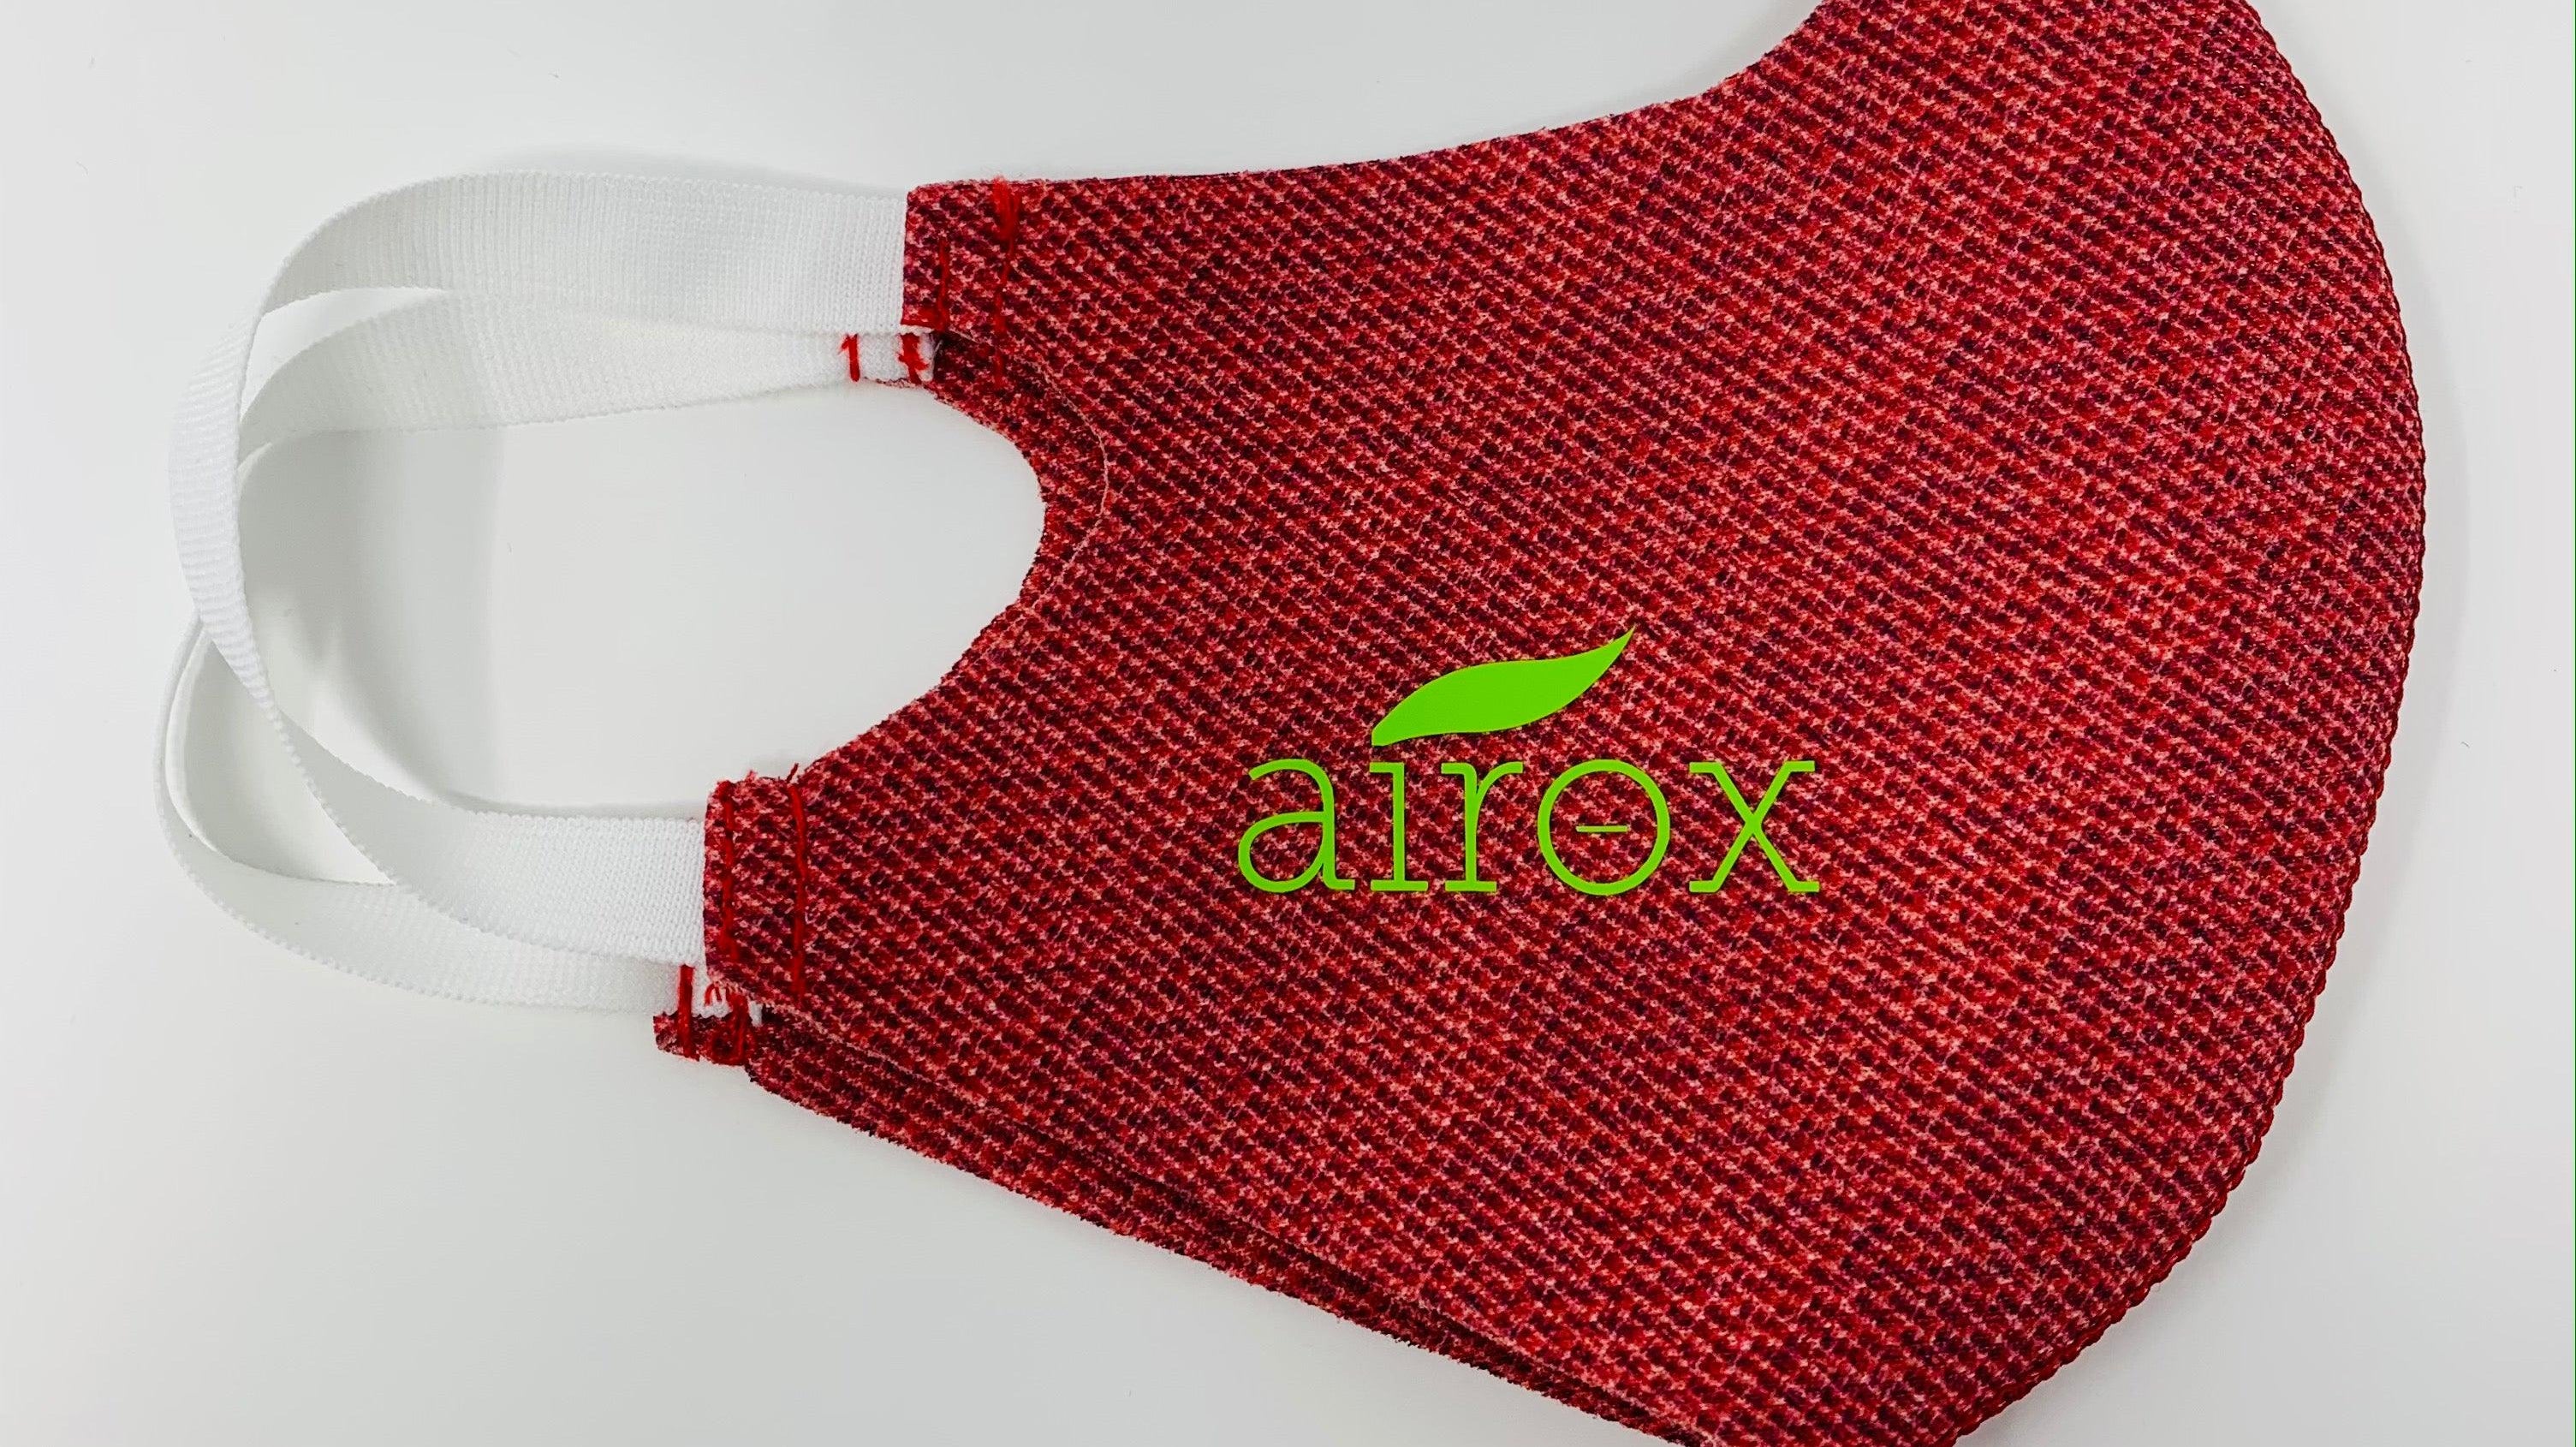 Airox launches colour range - 6 colours - Airospring